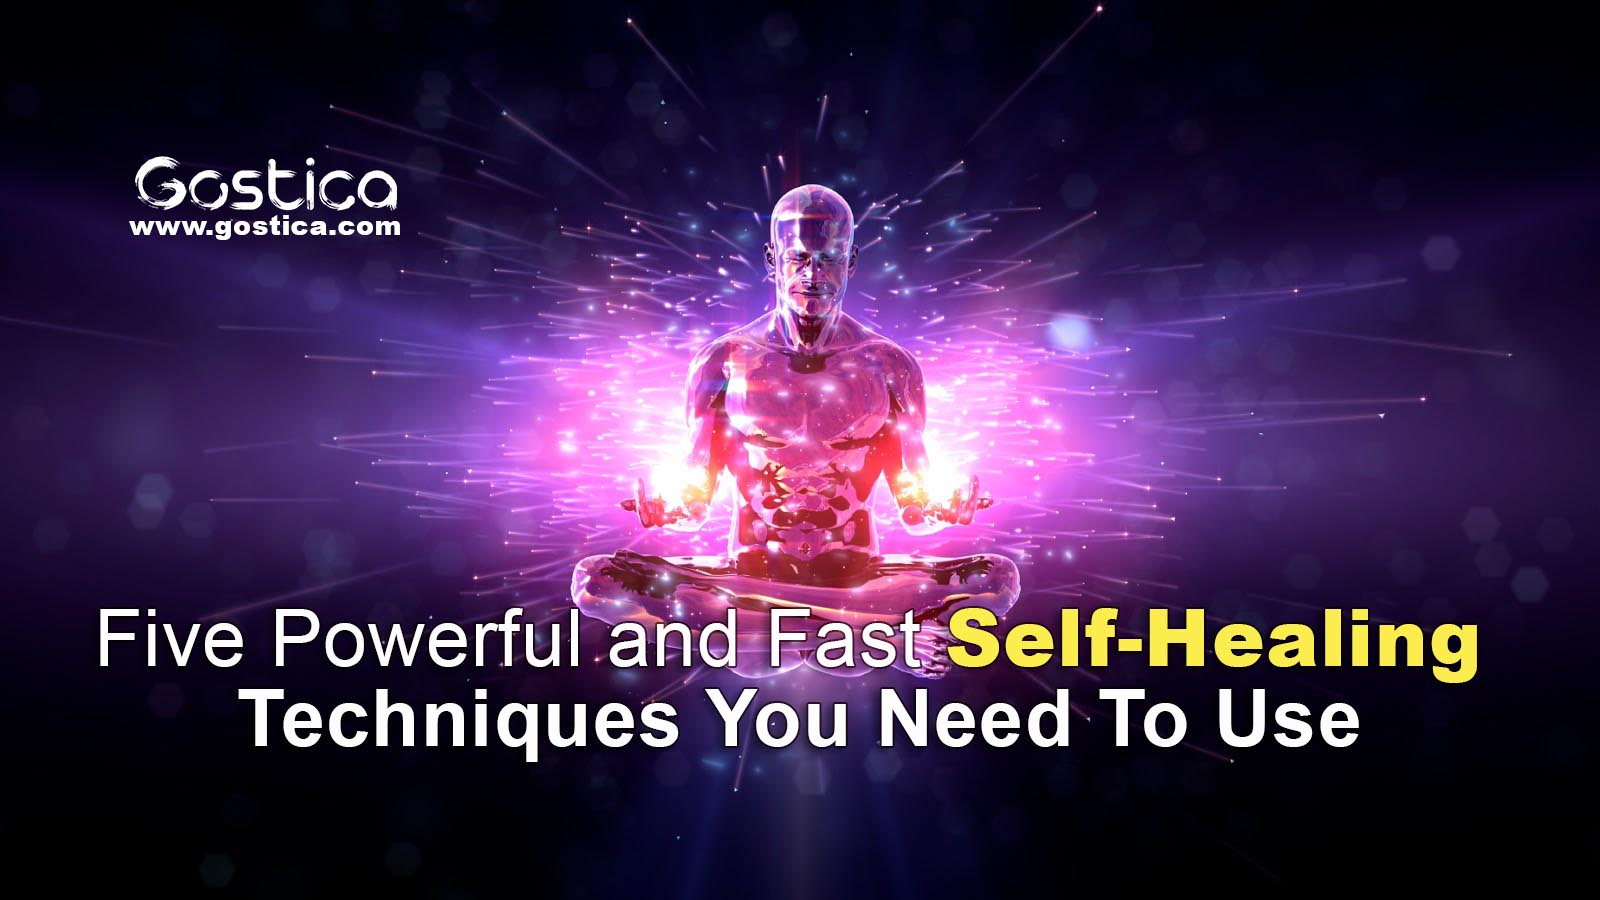 Five-Powerful-and-Fast-Self-Healing-Techniques-You-Need-To-Use.jpg